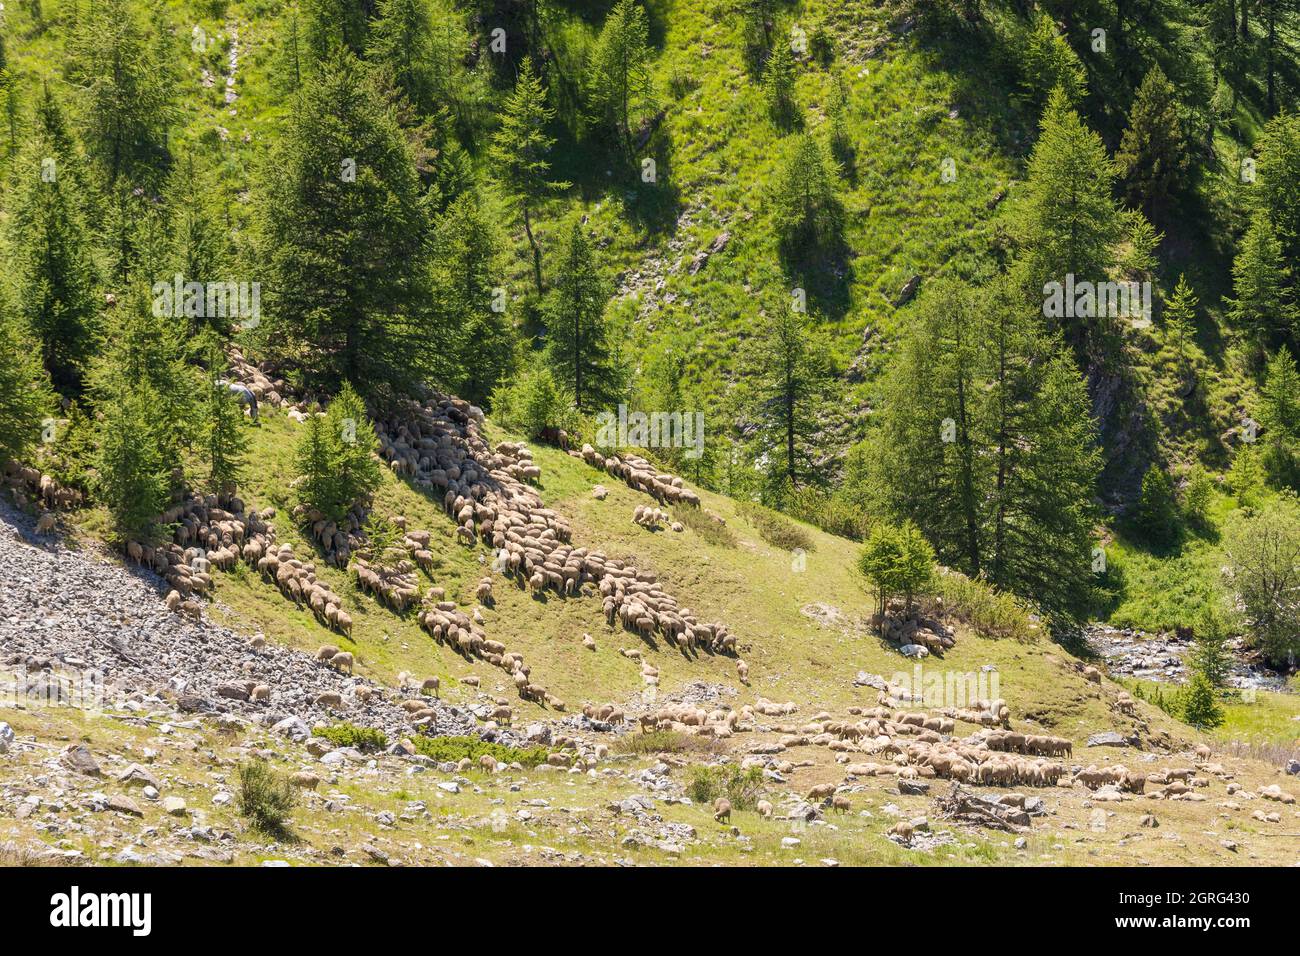 France, Alpes de Haute Provence, Ubaye valley, flock of sheep near the road to the Bonnette pass Stock Photo